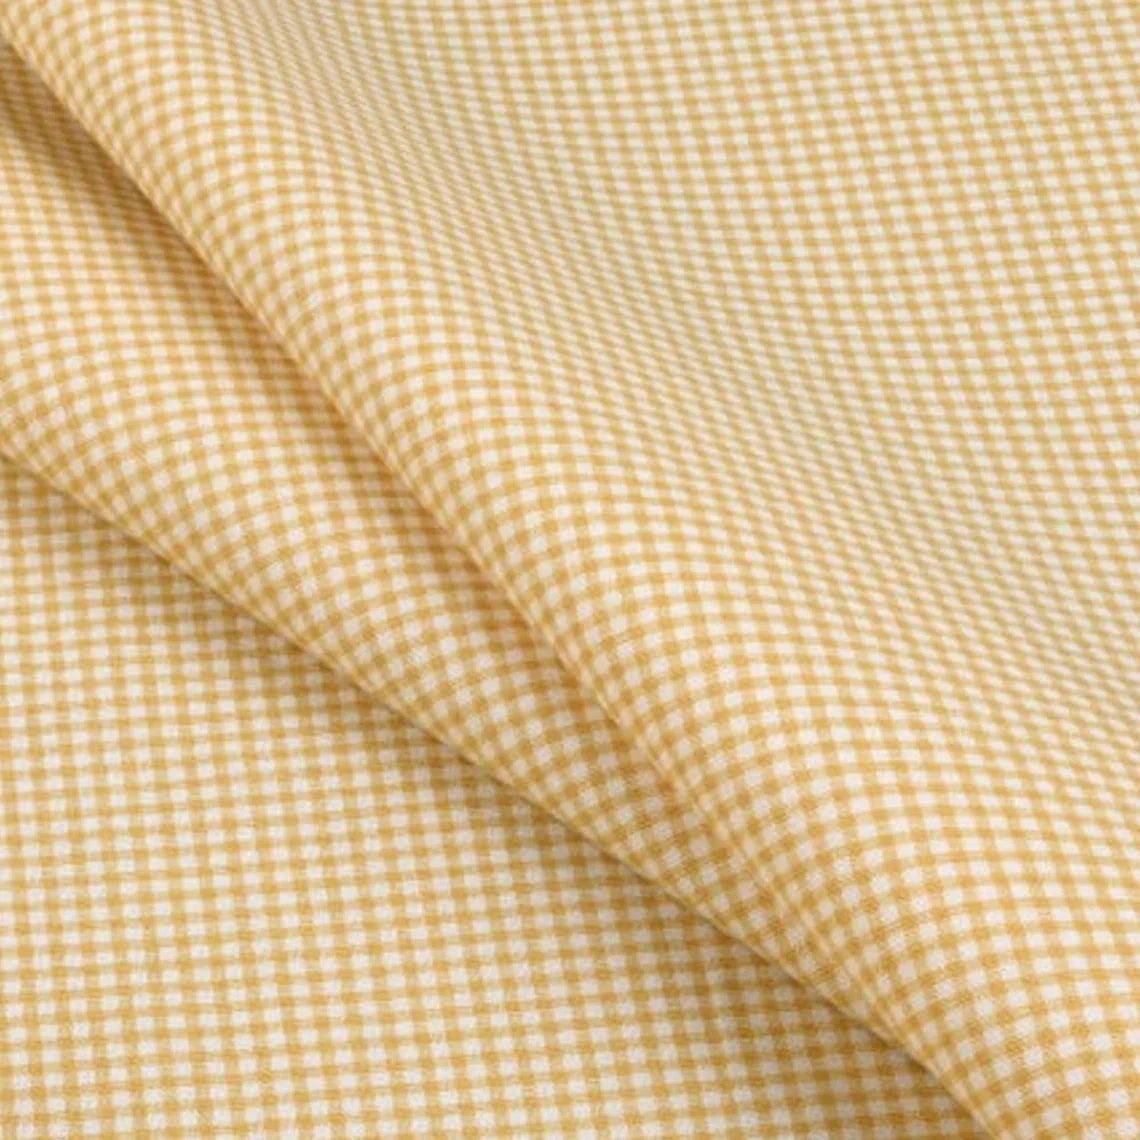 Tab Top Curtain Panels Pair in Farmhouse Barley Yellow Gold Gingham Check